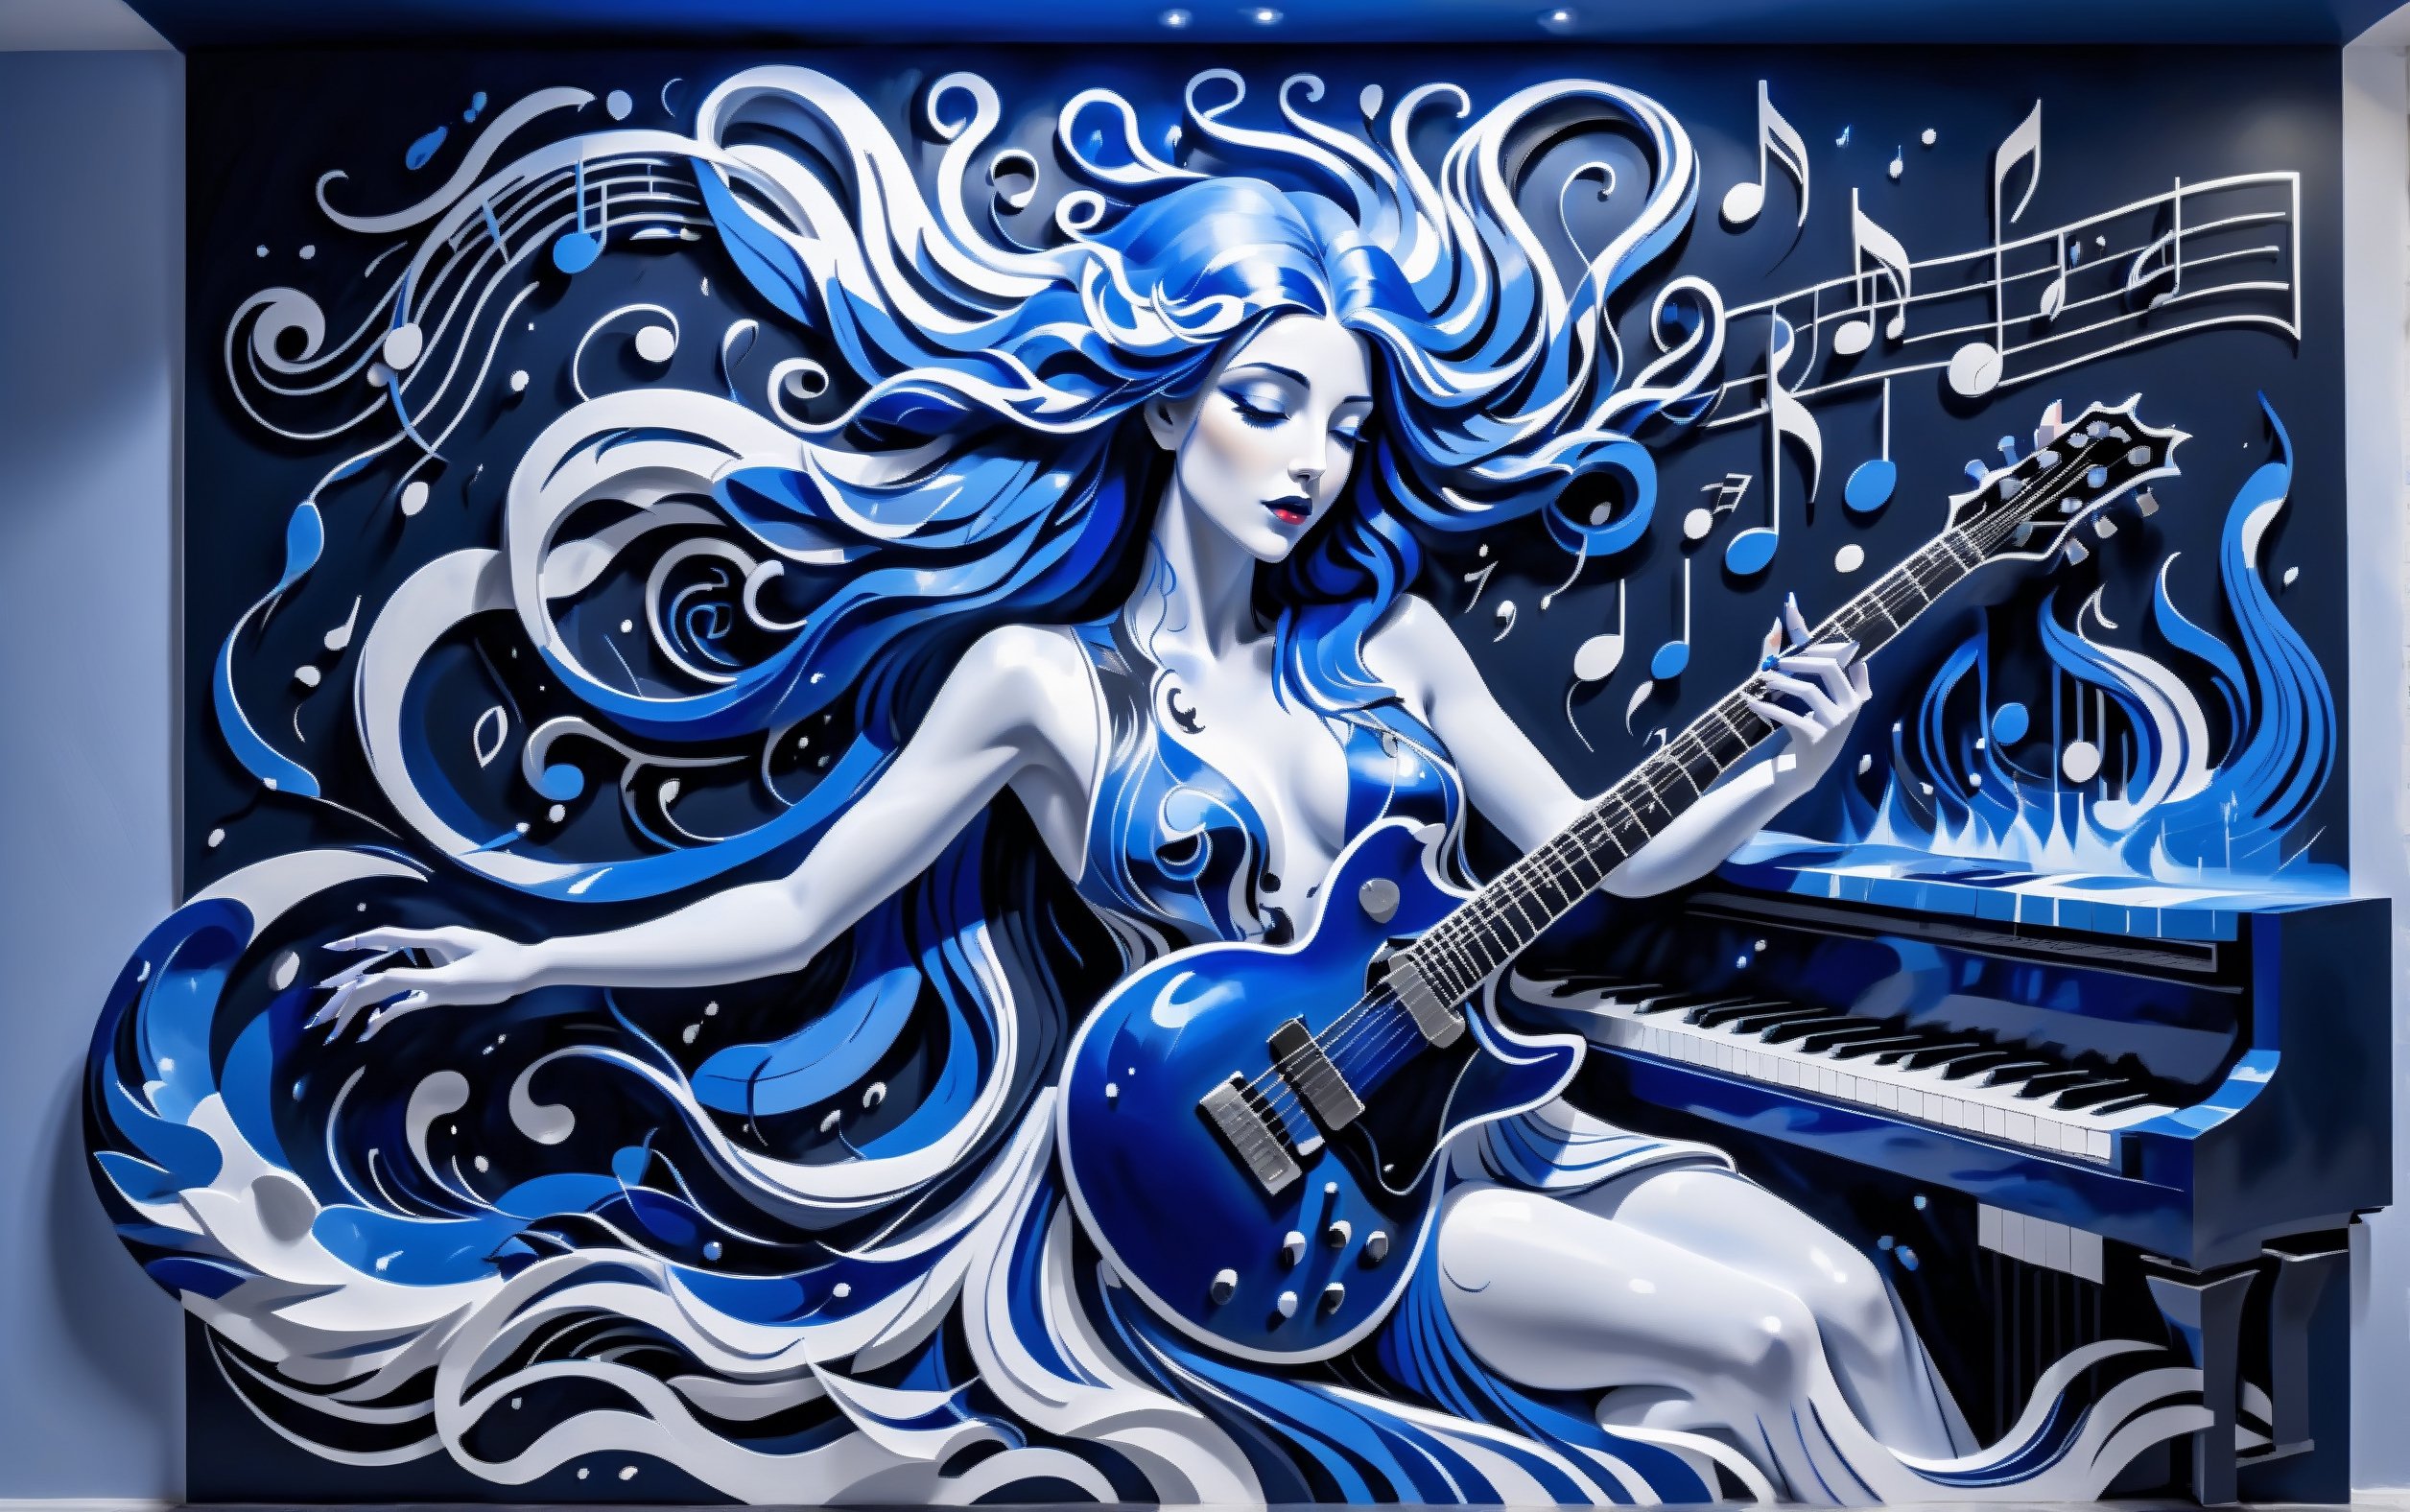 musical art, create an artistic wall painting in shades of cobalt blue, white, and deep blacks, the image has a musical theme, a beautiful woman with long blue hair playing an electric blue guitar surrounded by musical instruments, notes in the air, liquid piano keyboard, detailed dramatic interpretation of music and sound, art deco ,3D MODEL